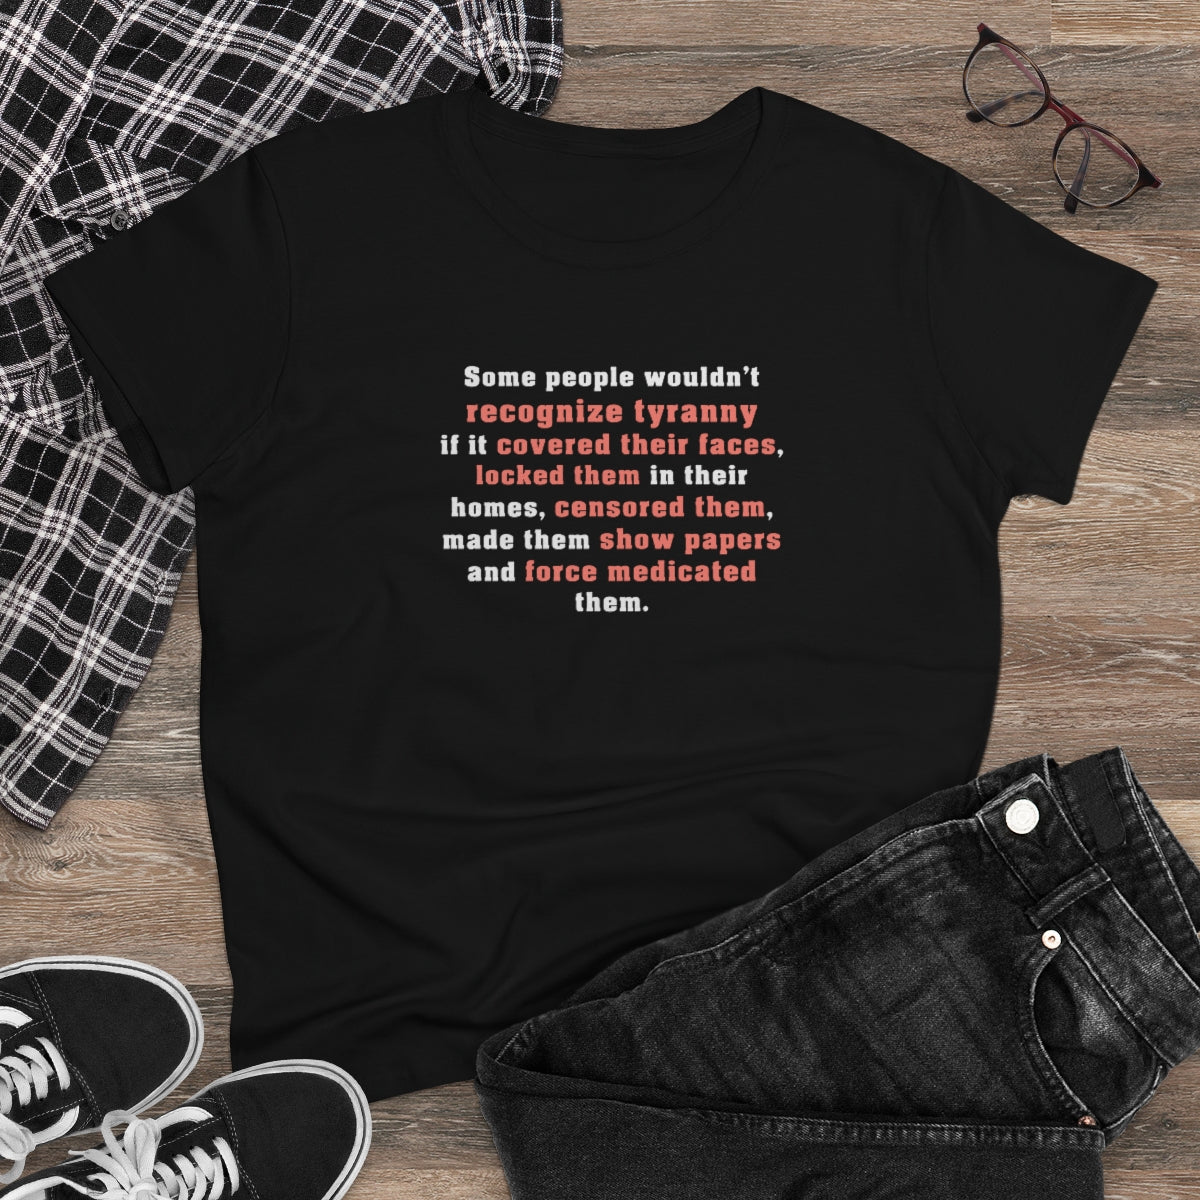 Some People Wouldn't Recognize Tyranny... | Women's Tee - Rise of The New Media